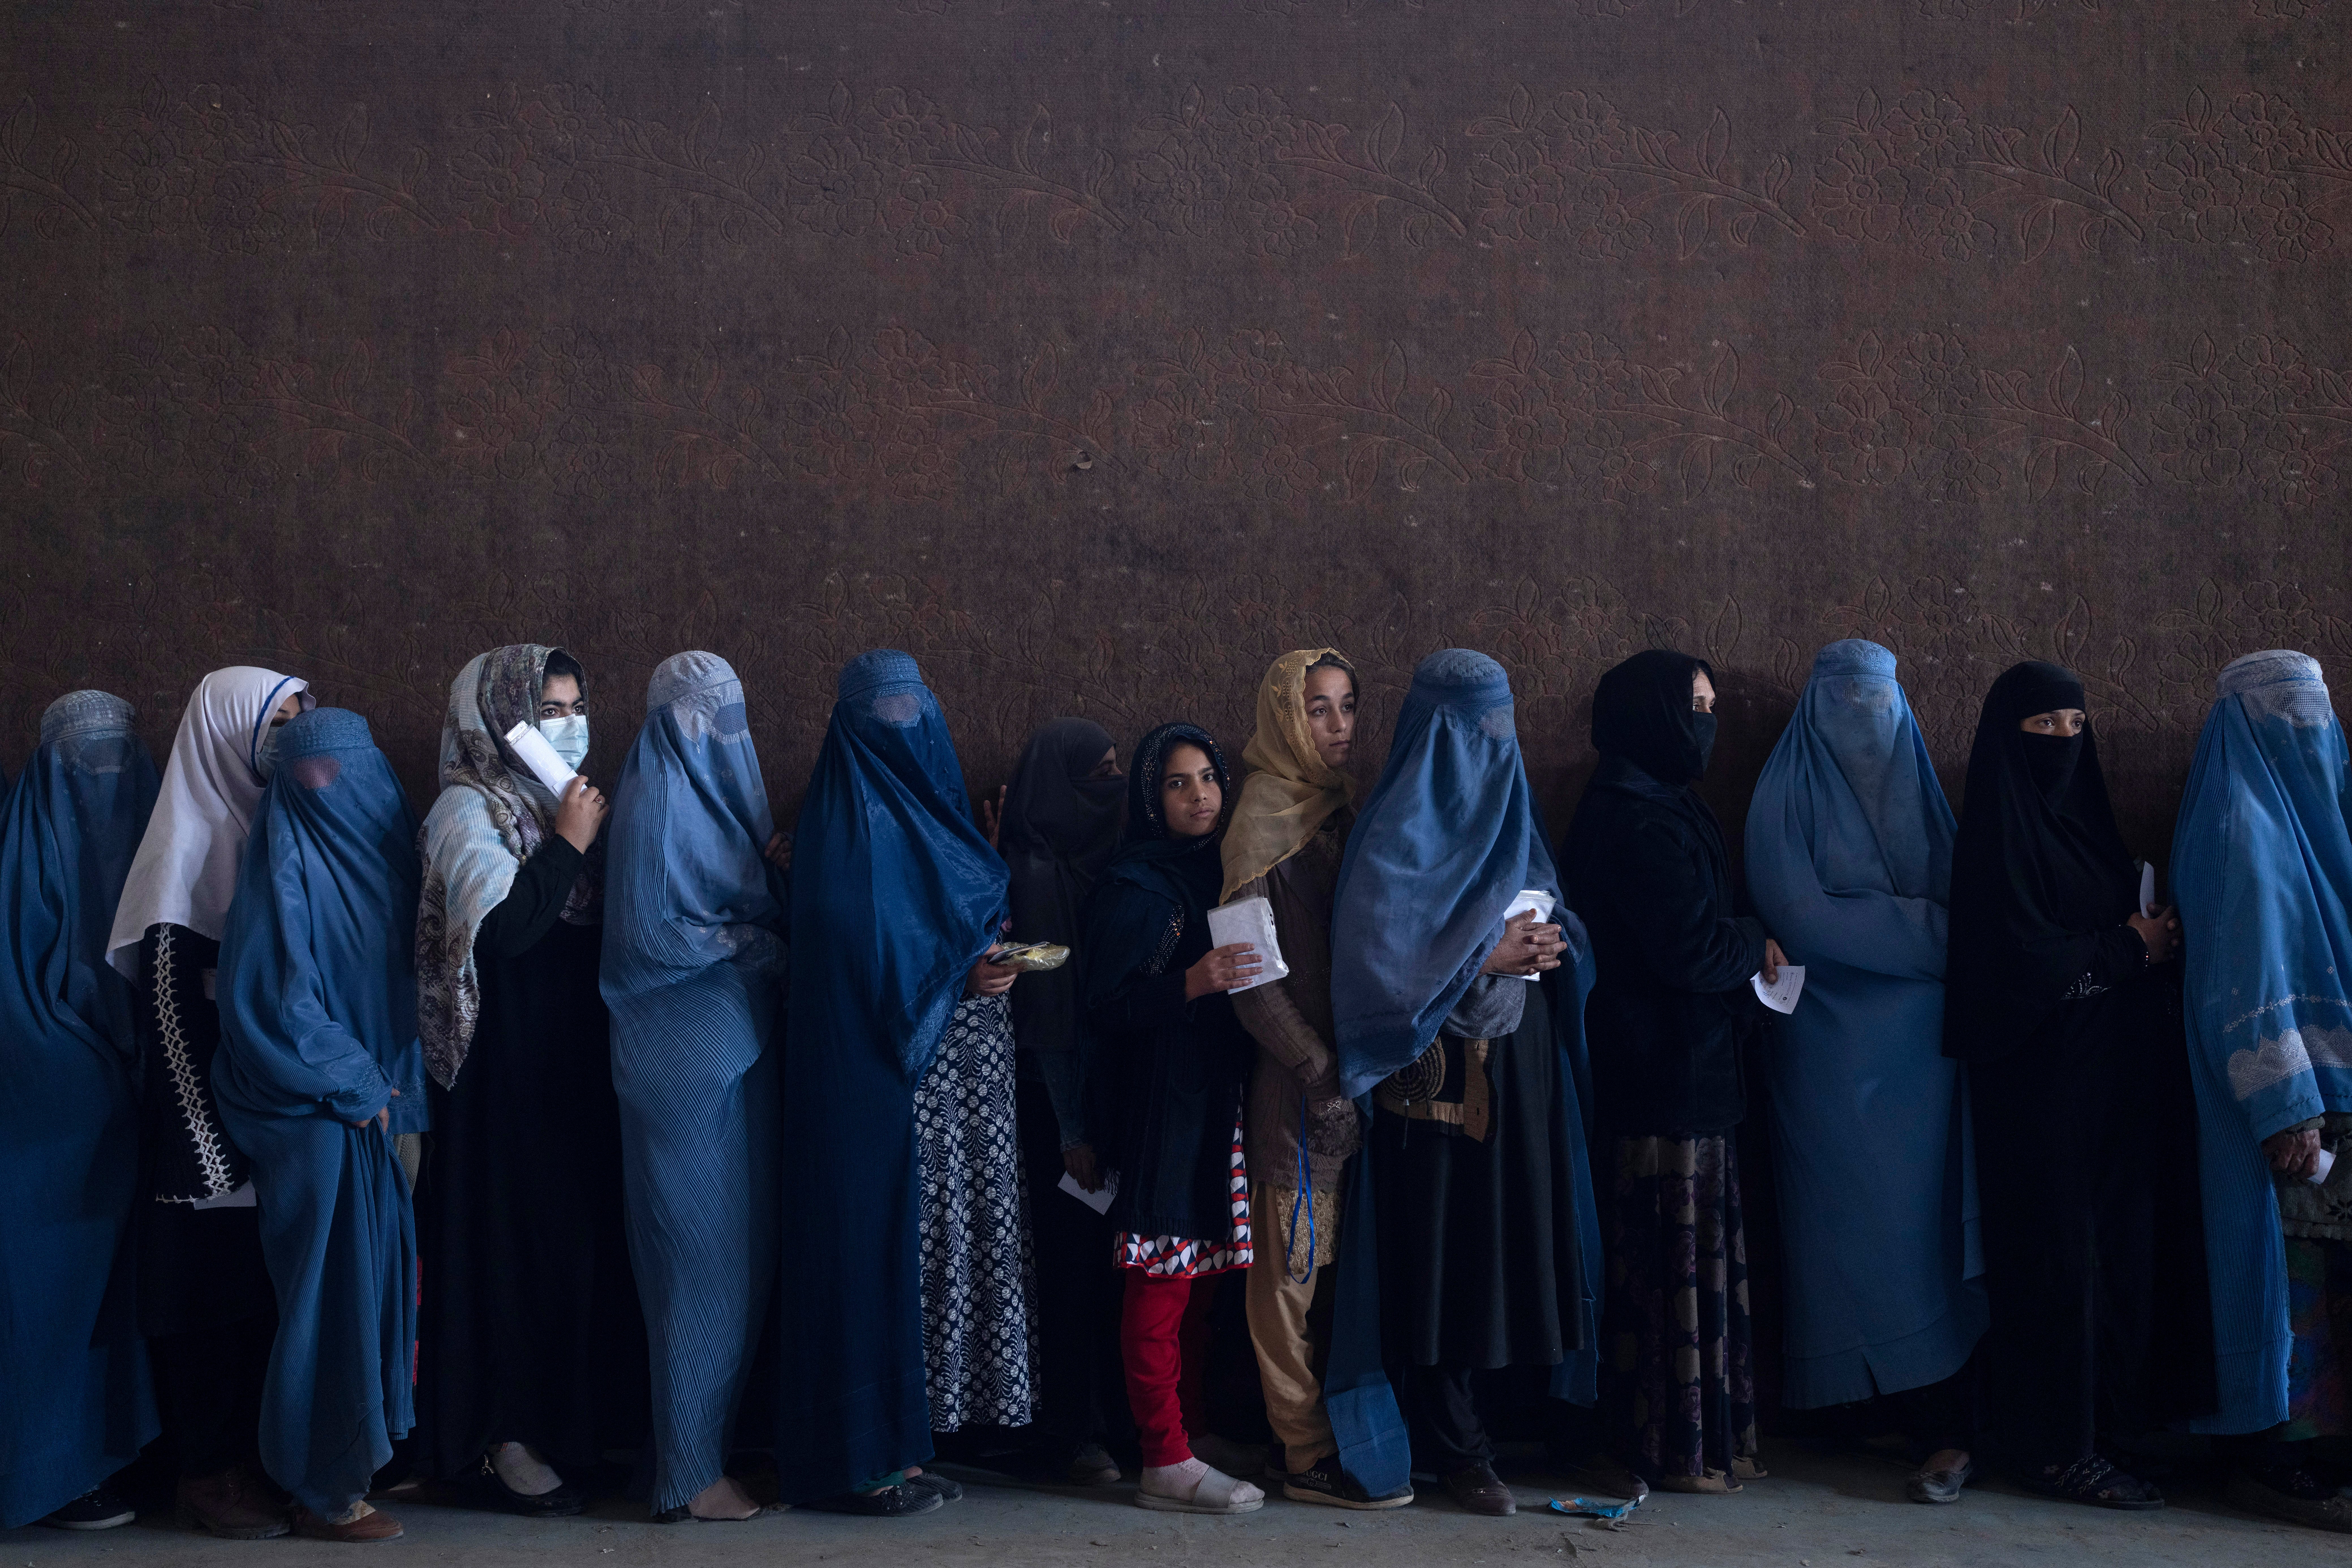 Women line up to receive cash at a money distribution point organised by the World Food Program in Kabul